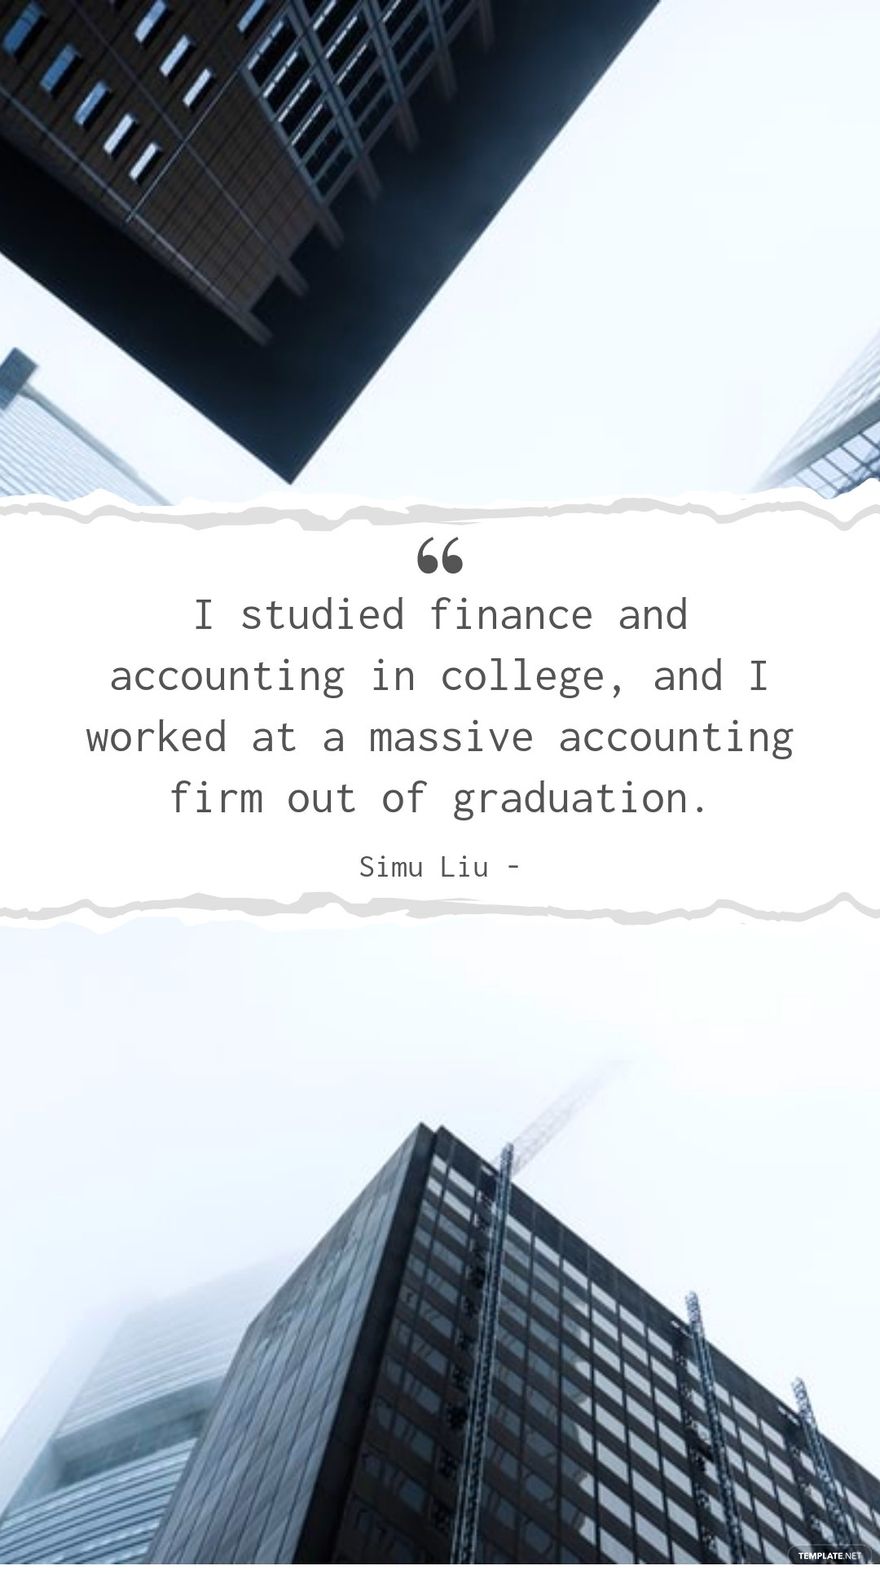 Free Simu Liu - I studied finance and accounting in college, and I worked at a massive accounting firm out of graduation.